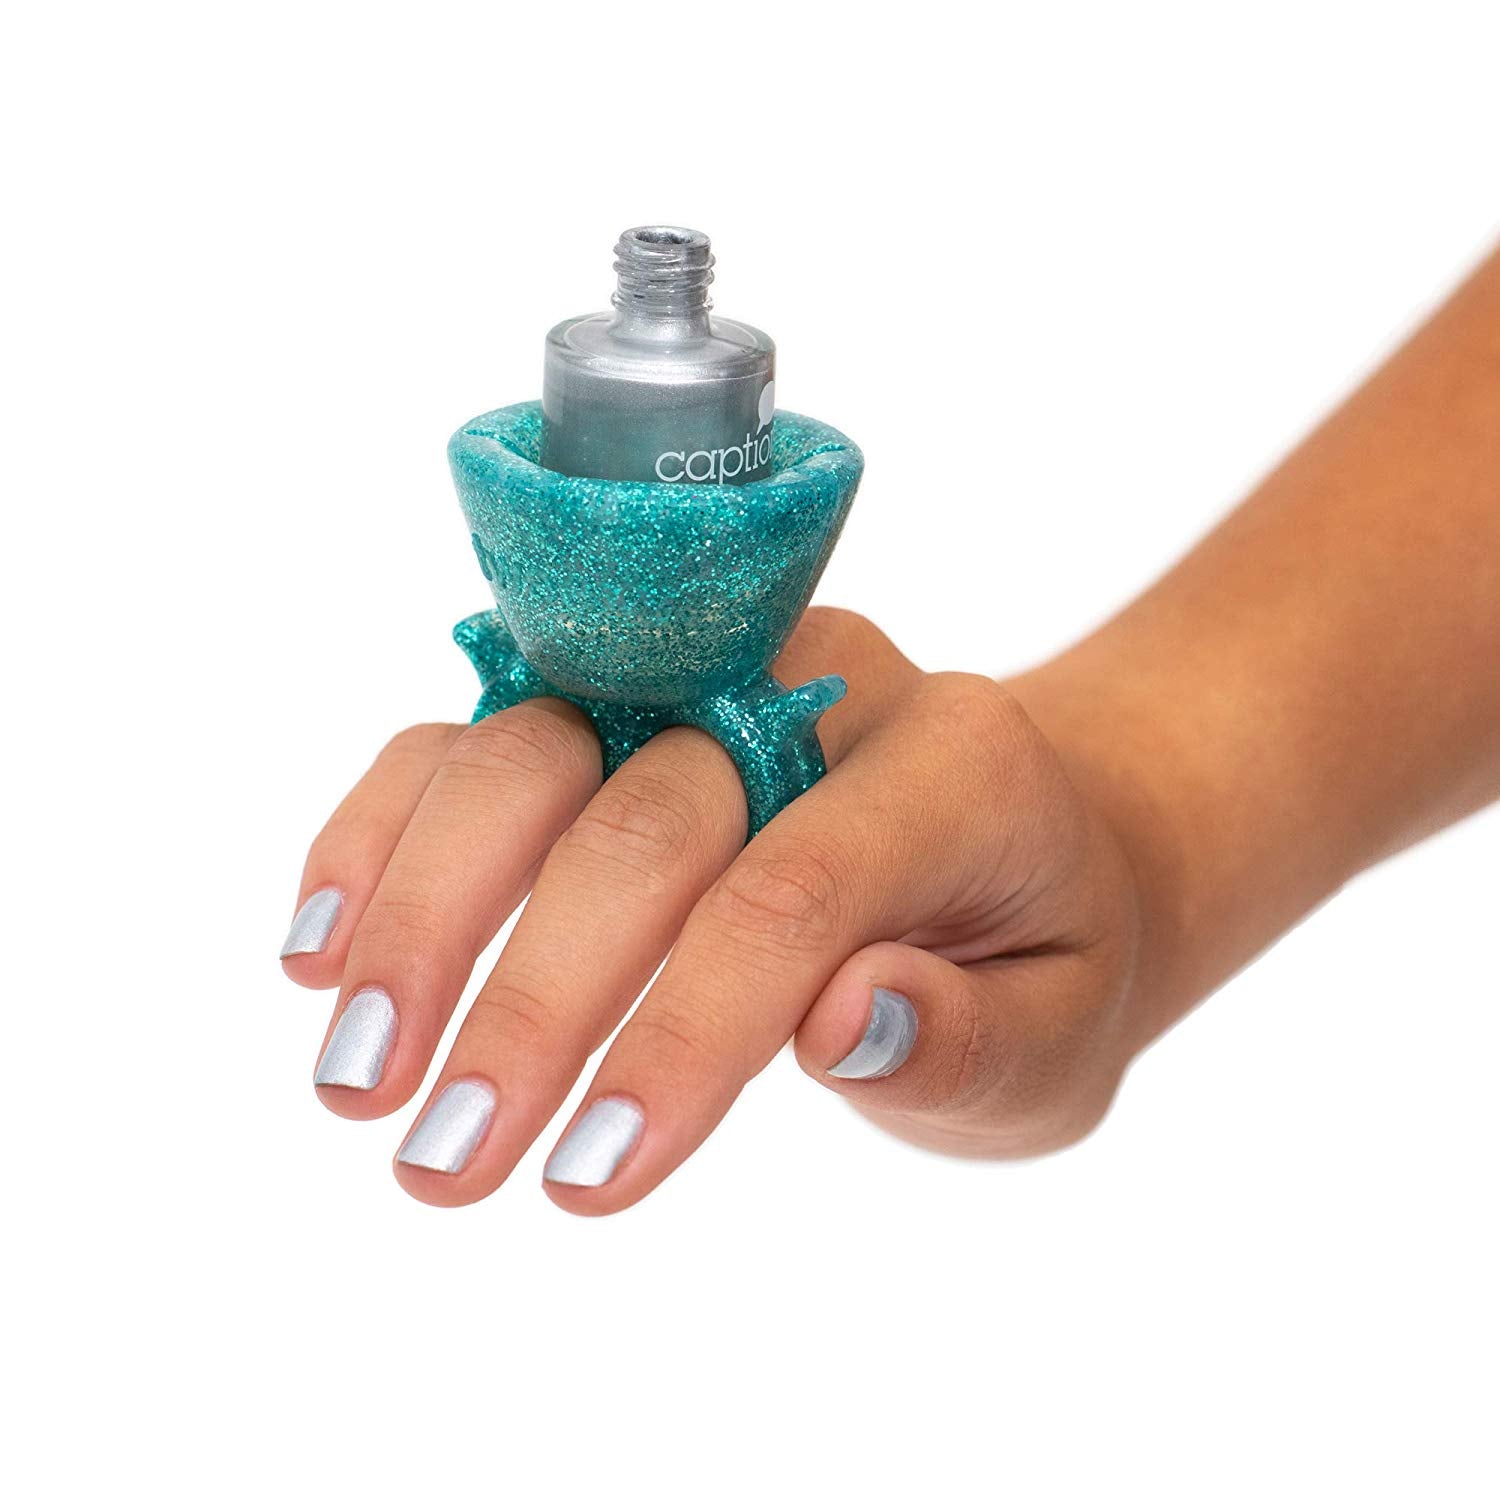 This Genius New Nail Polish Holder Makes Painting Your Nails SO Much Easier